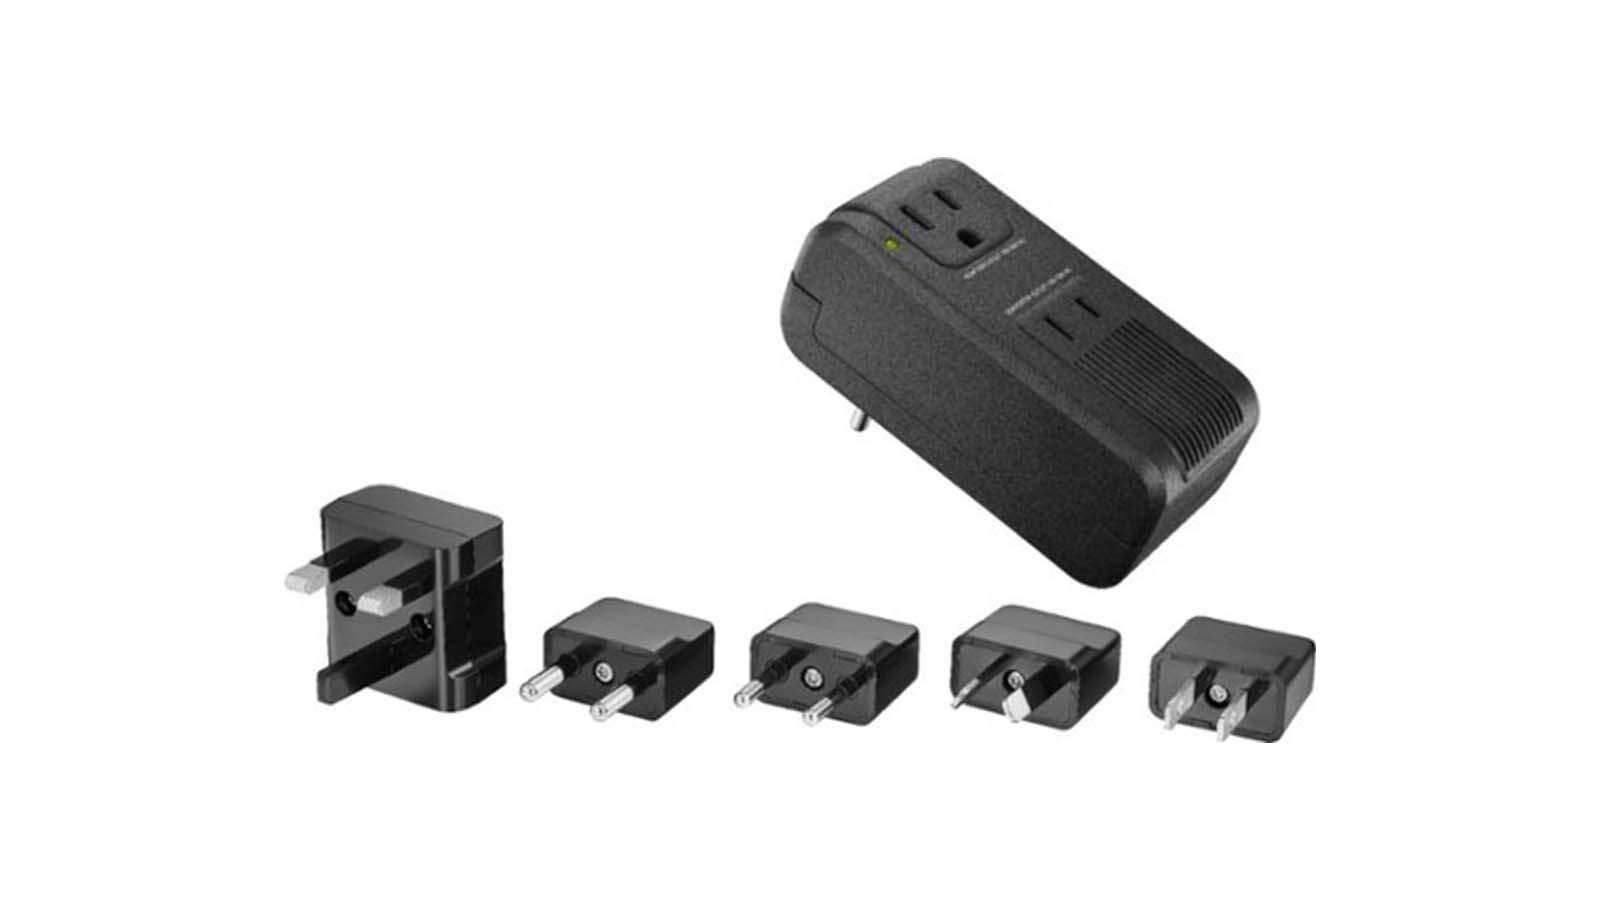 The 4 Best Universal Travel Adapters - Buy Side from WSJ